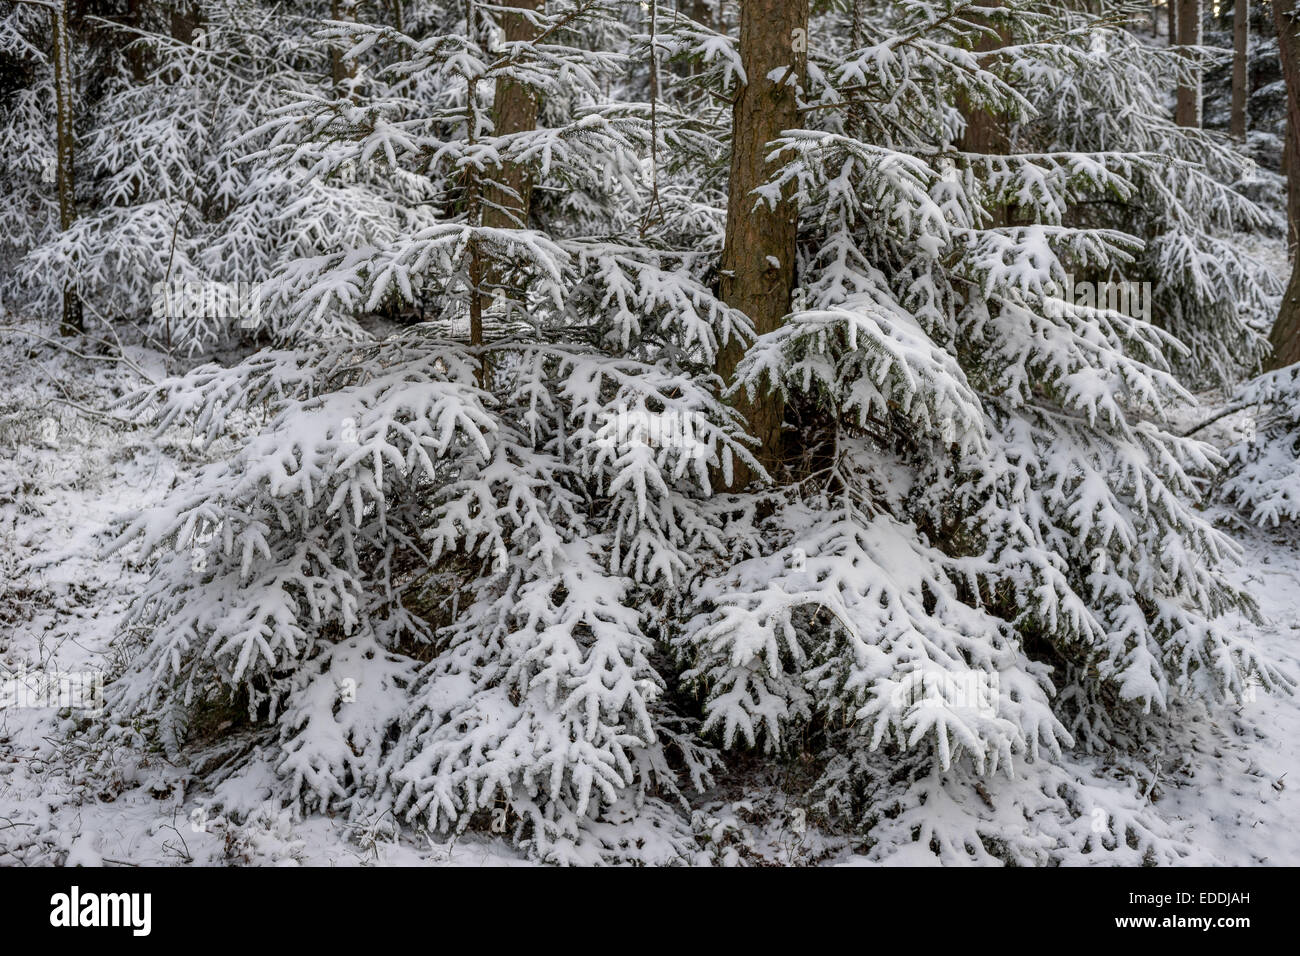 Spruce tree forest covered with snow Stock Photo